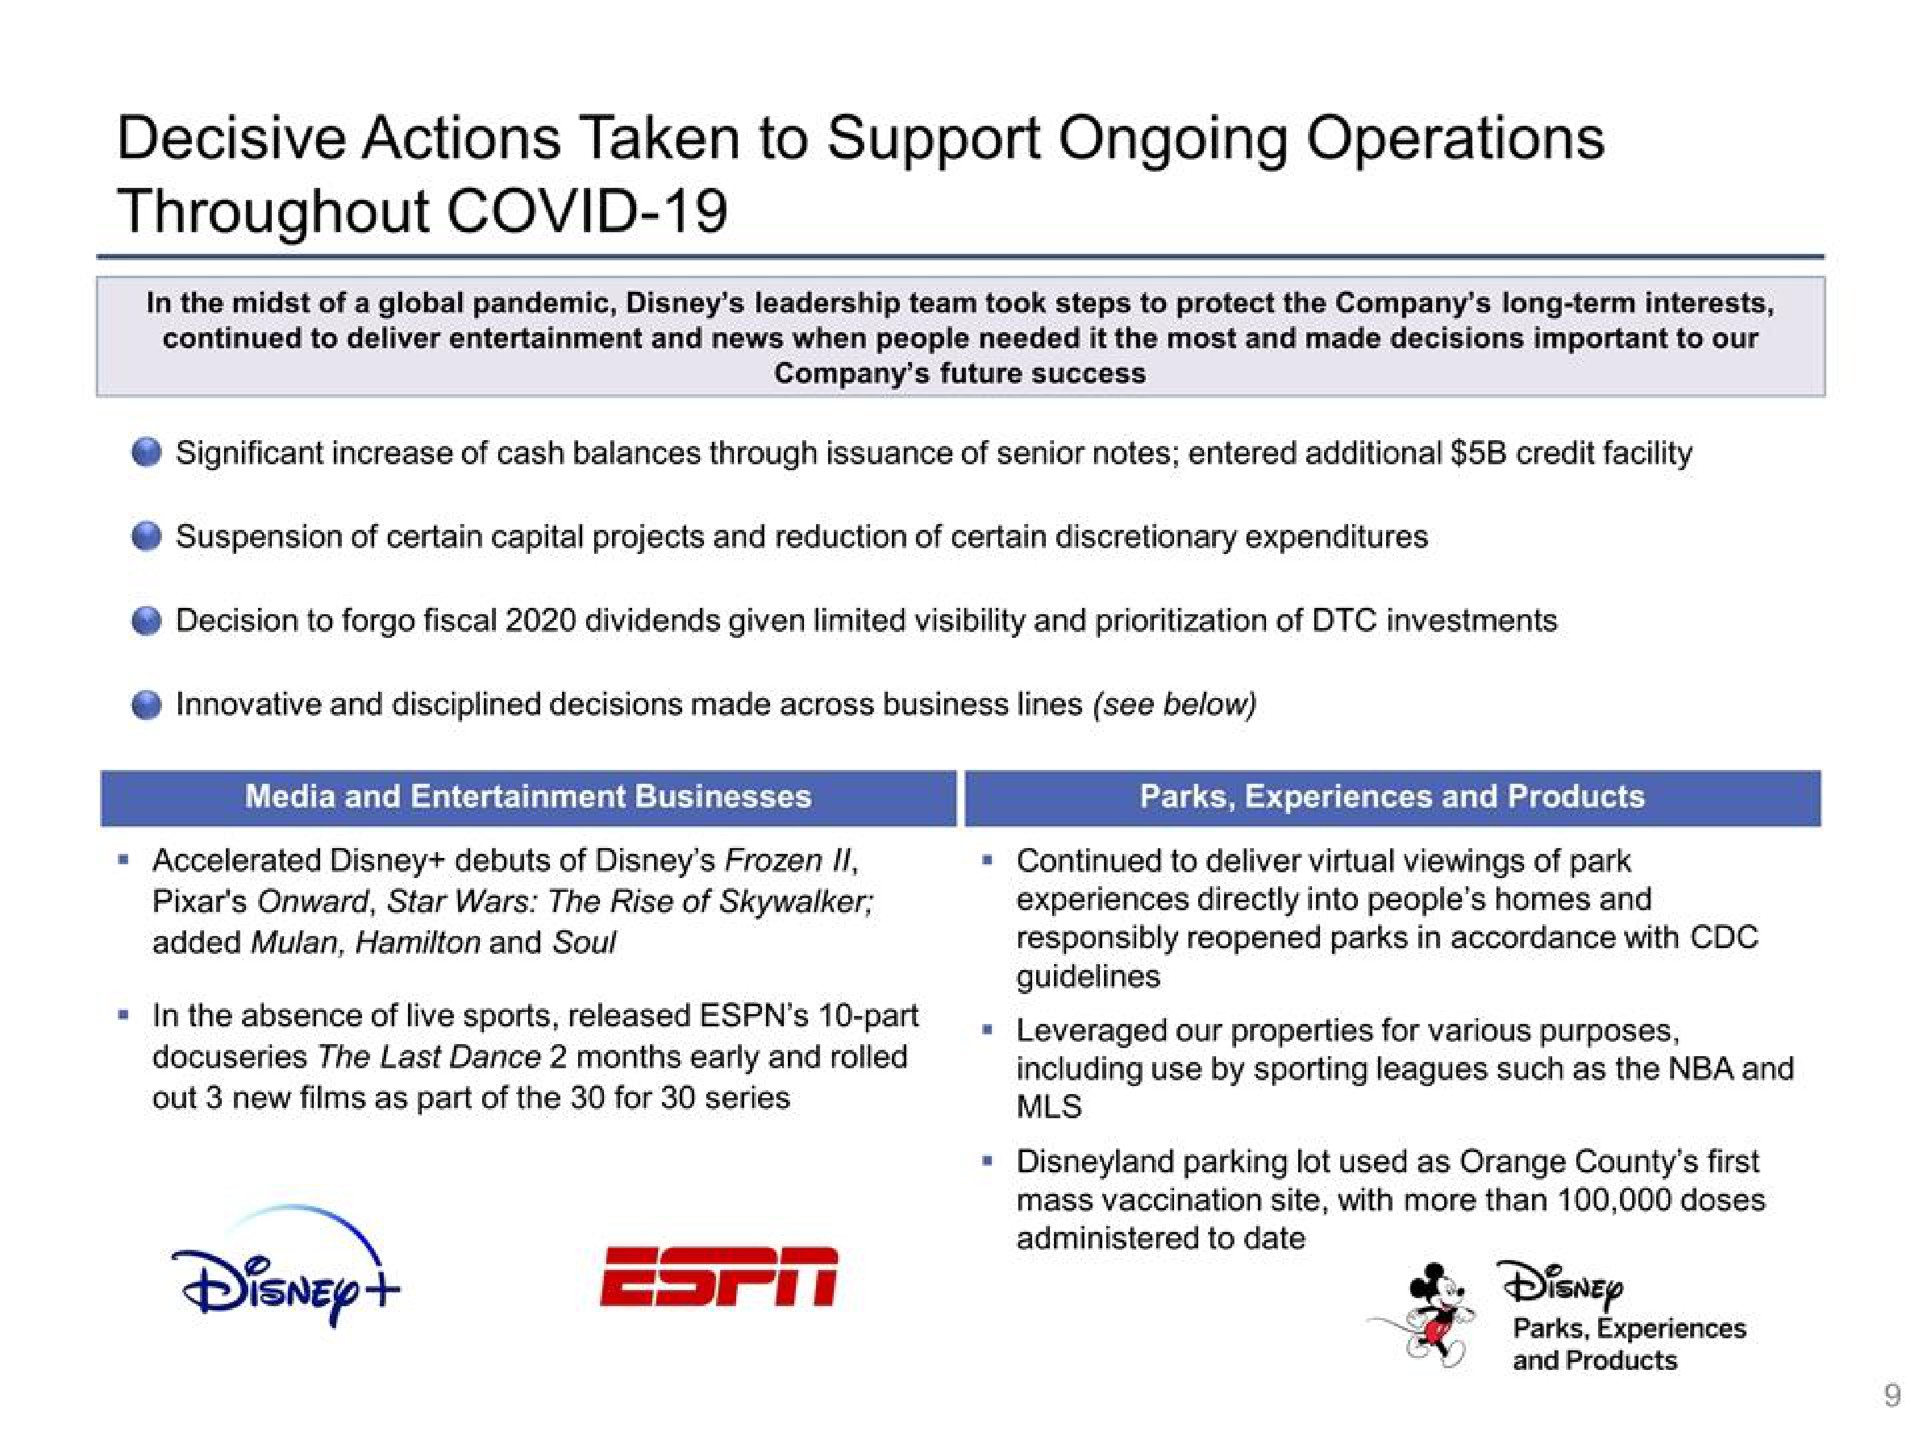 decisive actions taken to support ongoing operations throughout covid | Disney